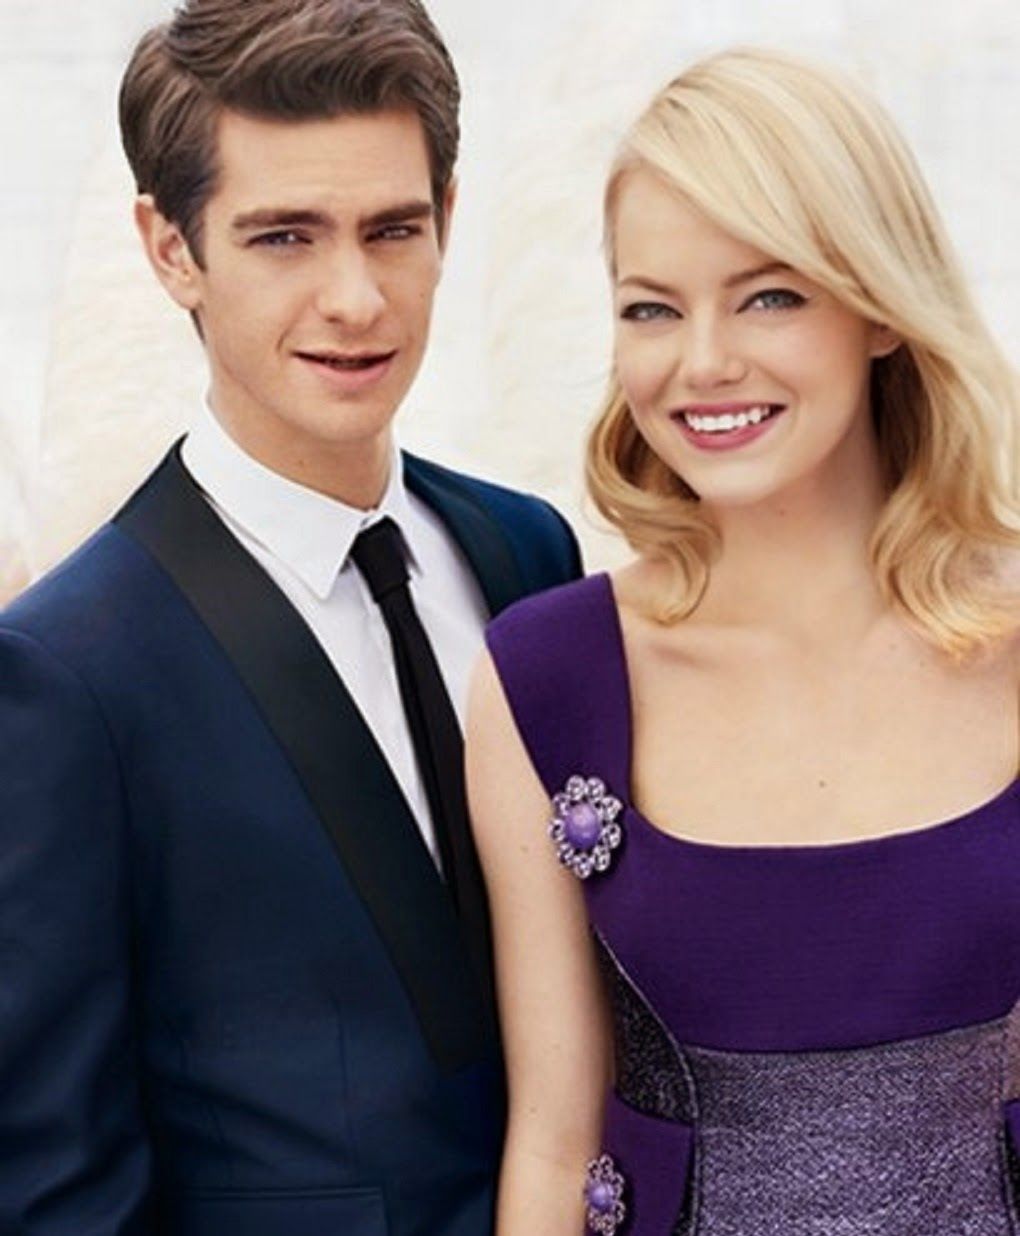 Every Couples HD Wallpaper Download: Emma Stone & Andrew Garfield Wallpaper Download